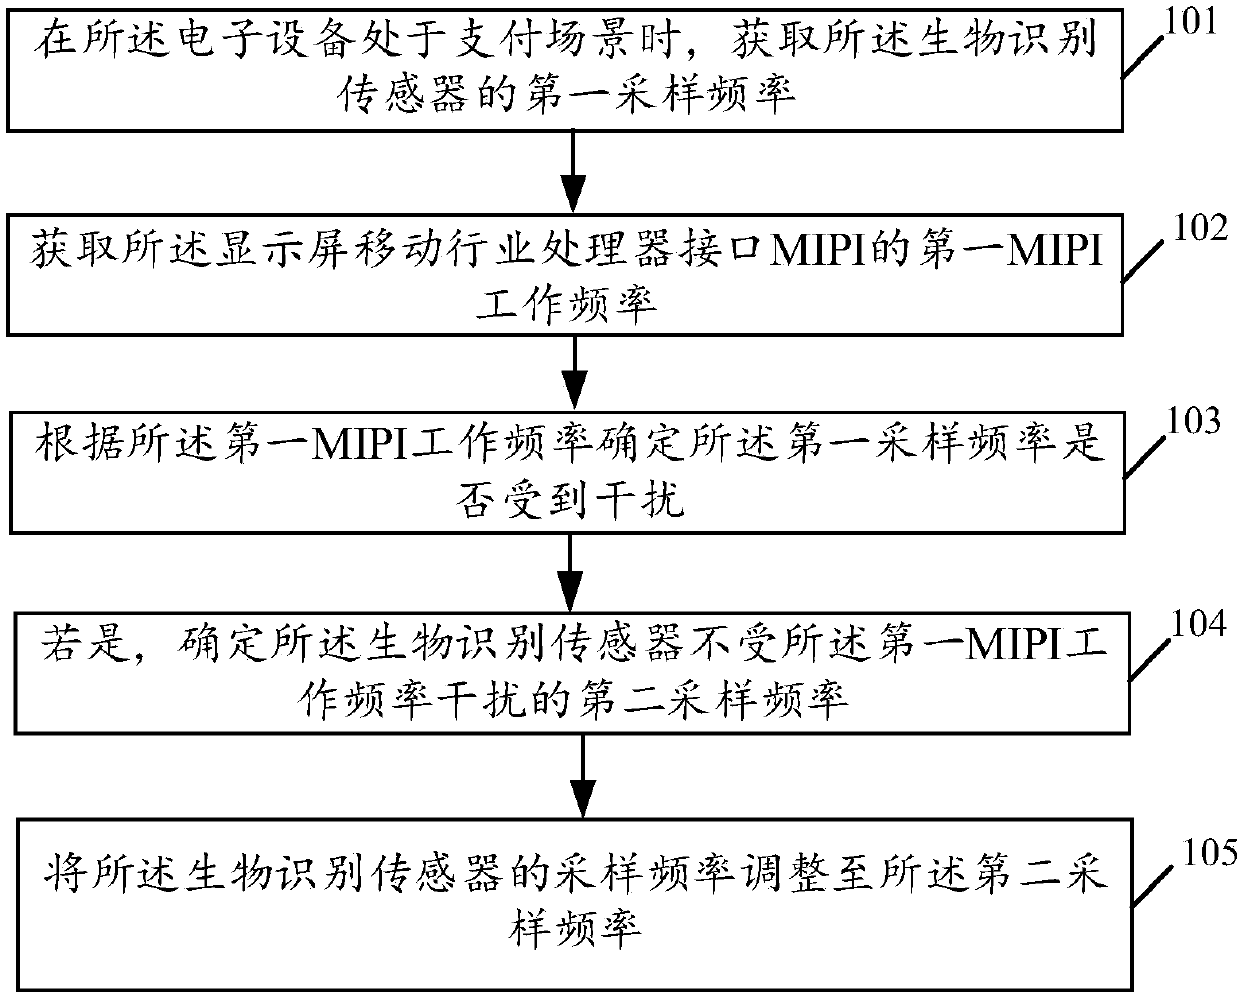 Electromagnetic interference control method and related product